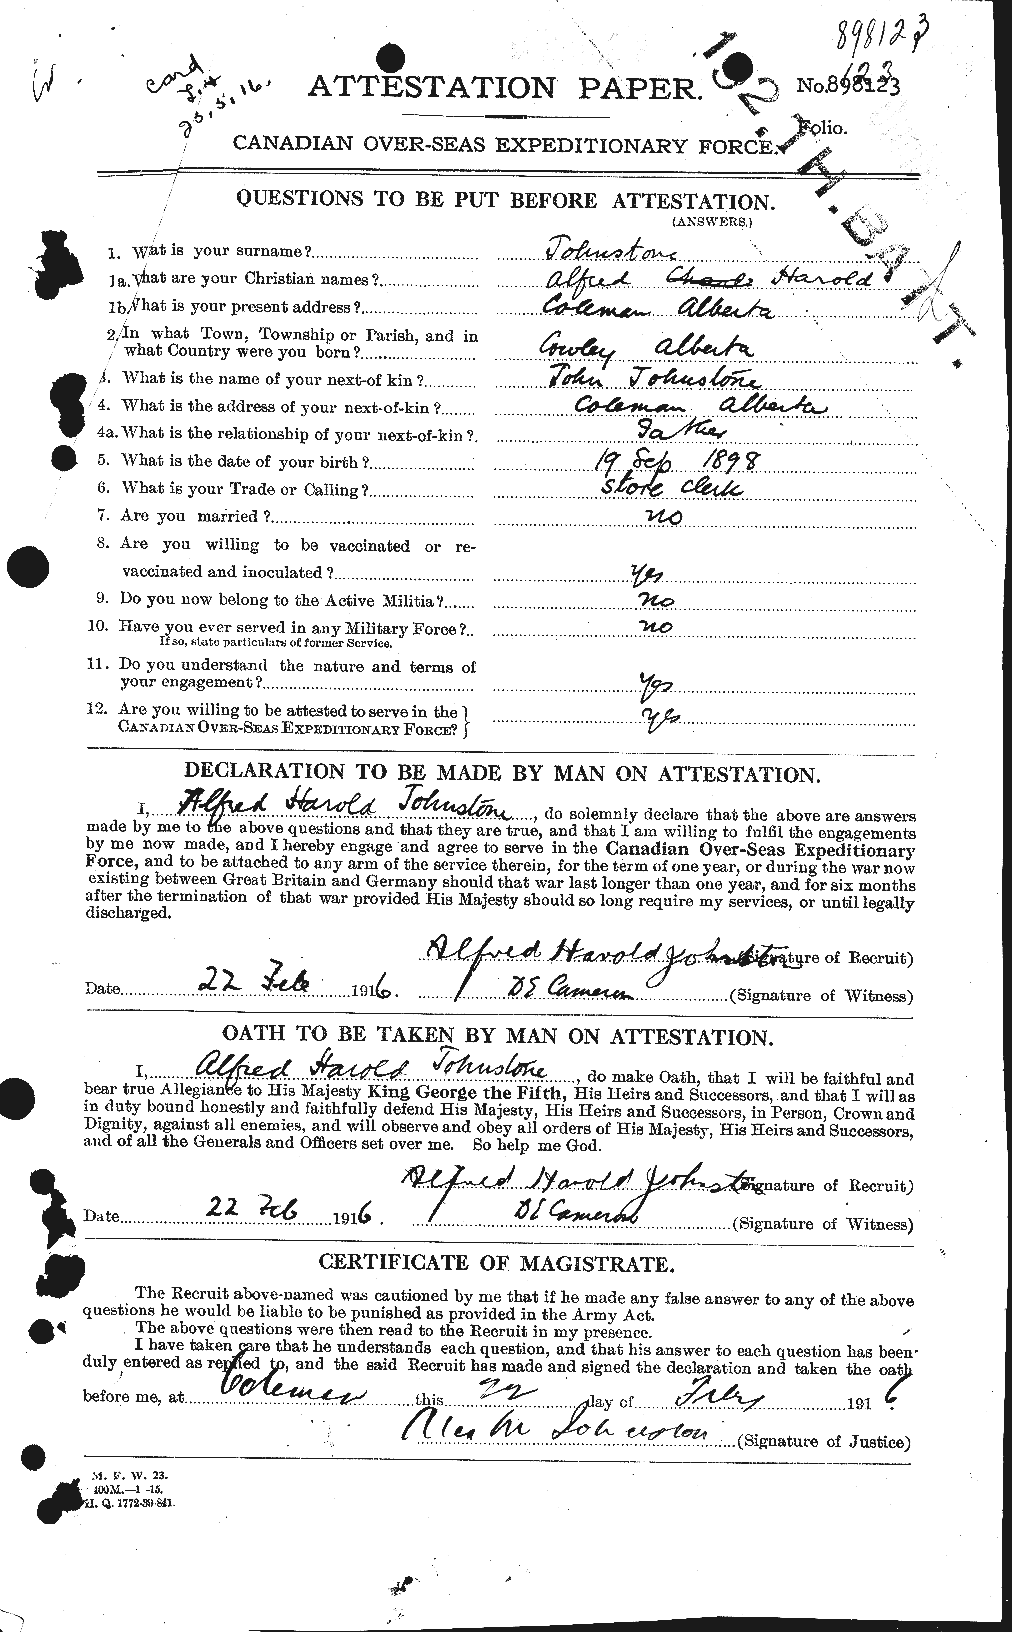 Personnel Records of the First World War - CEF 420991a